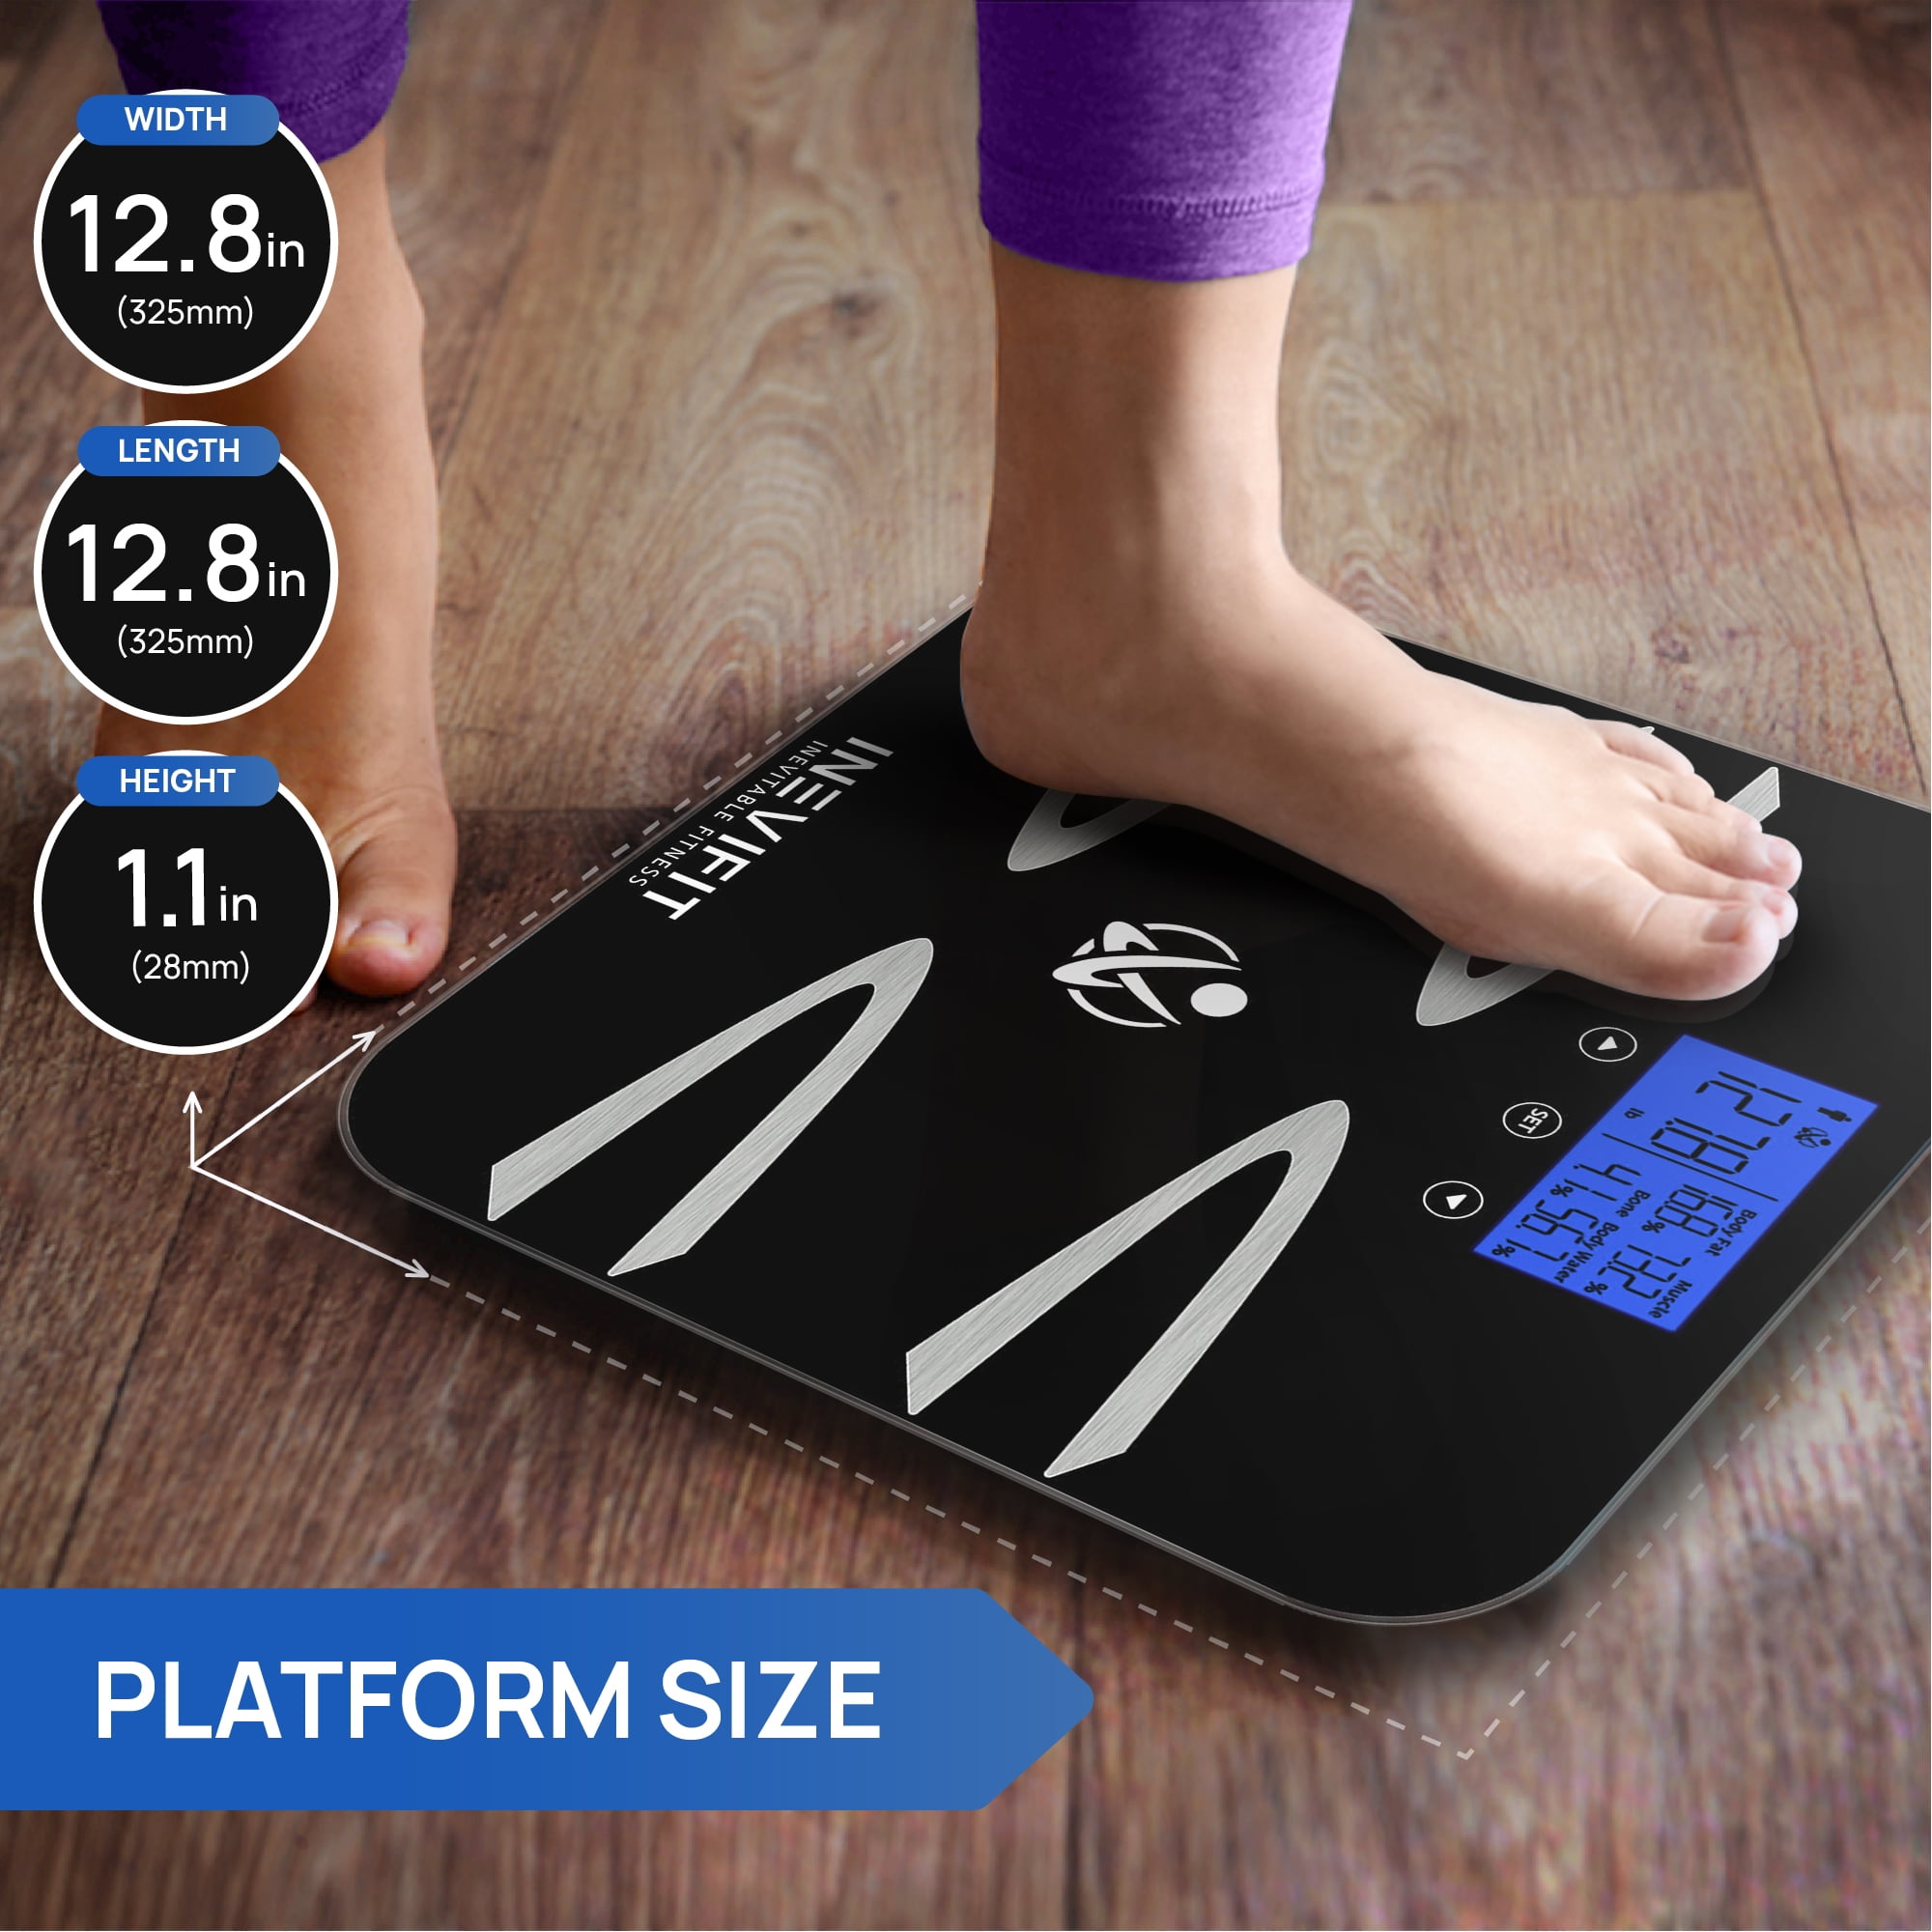 INEVIFIT DIGITAL KITCHEN SCALE, Highly Accurate Multifunction Food